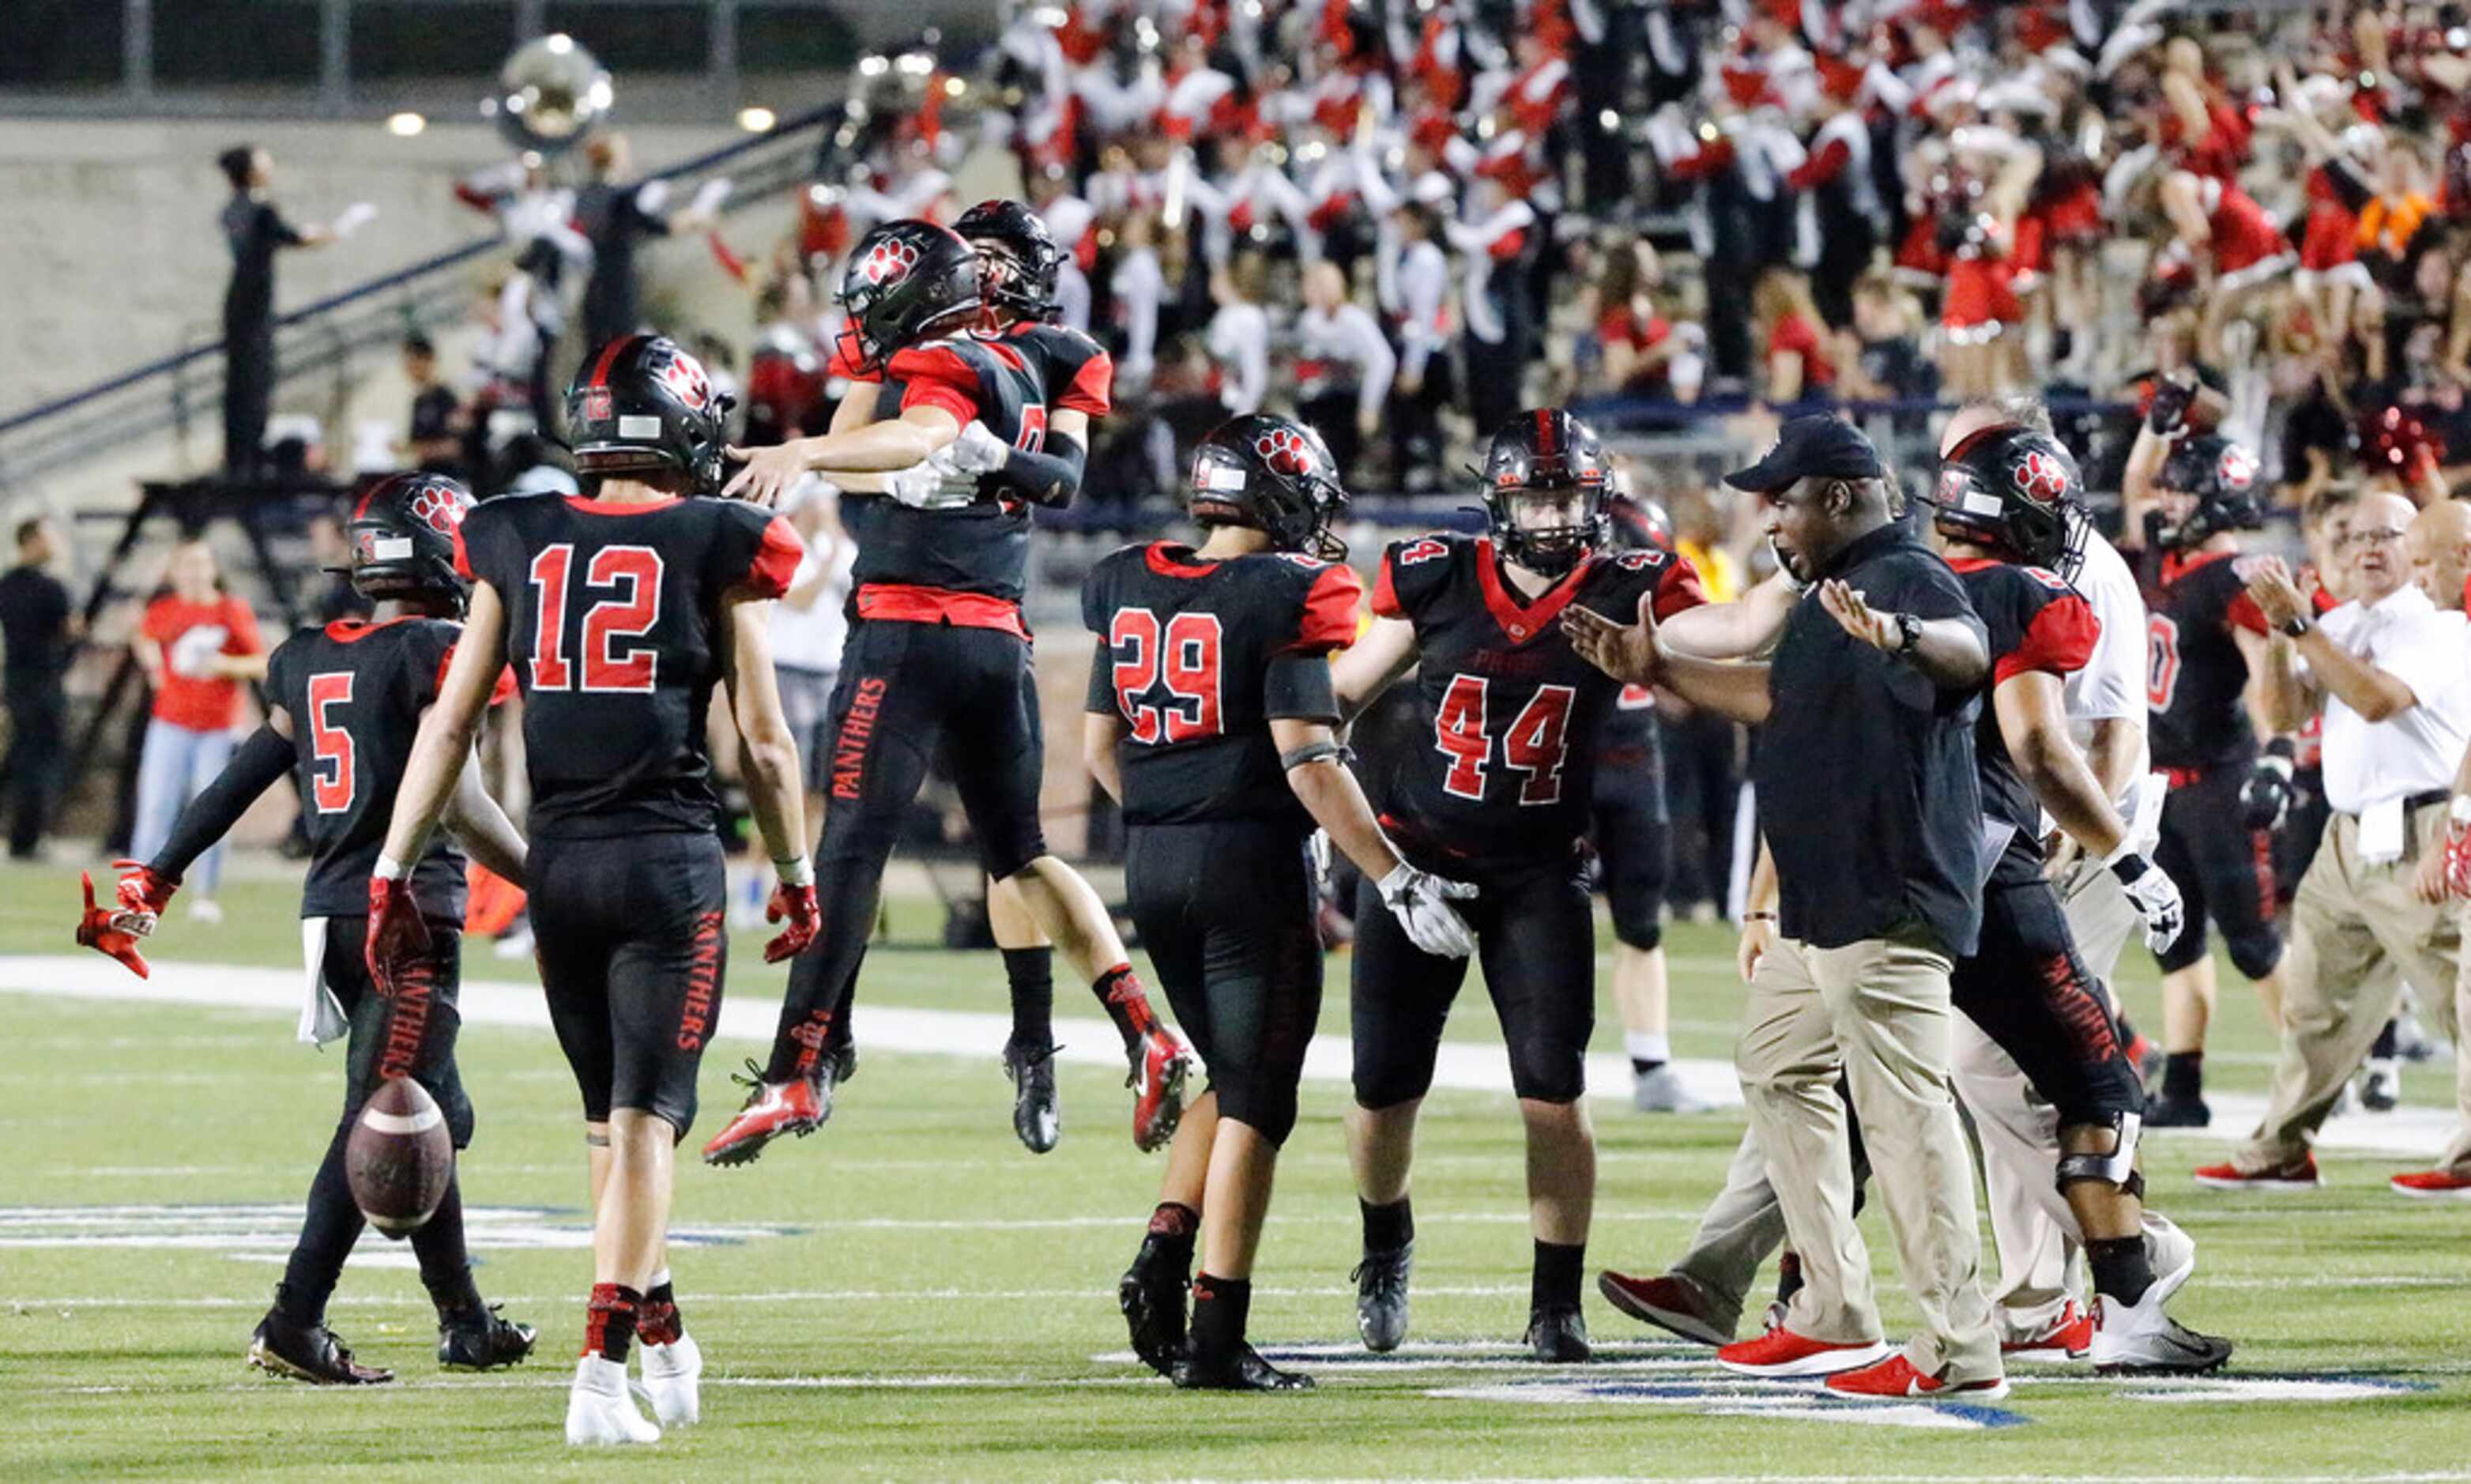 Colleyville Heritage reacts as they hang on to win by three points as Colleyville Heritage...